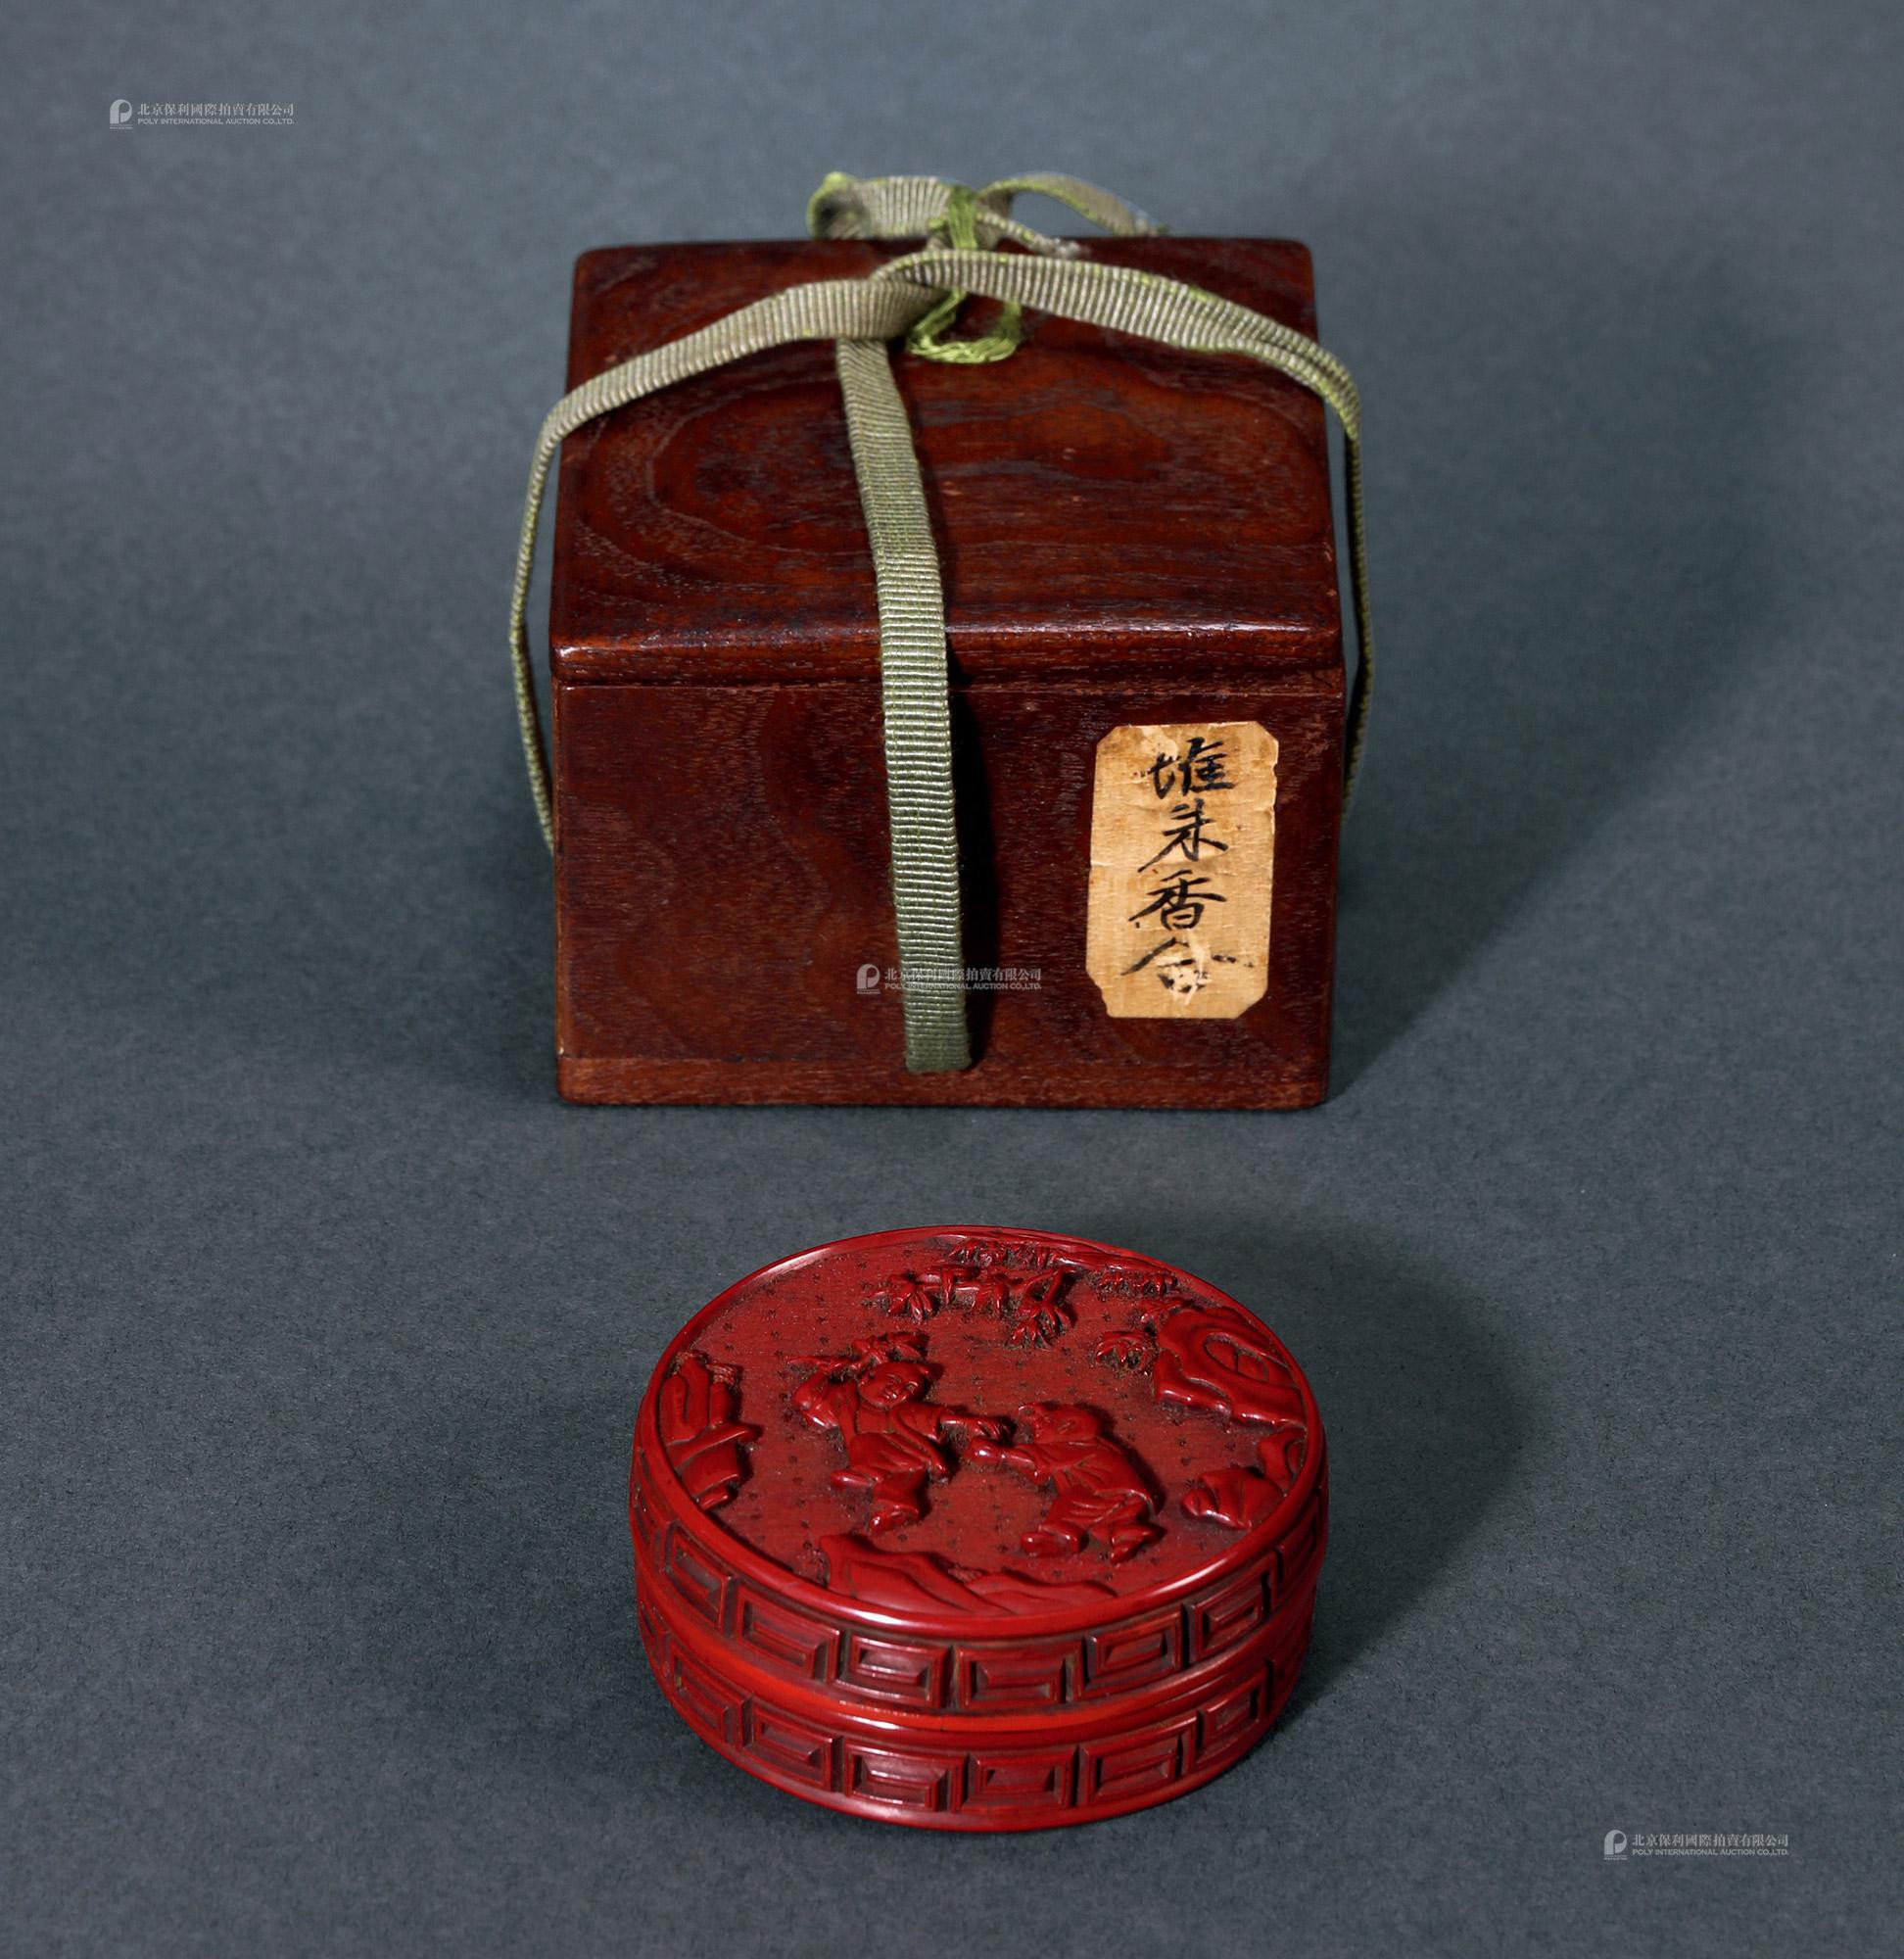 A CARVED LACQUERWARE BOX AND COVER